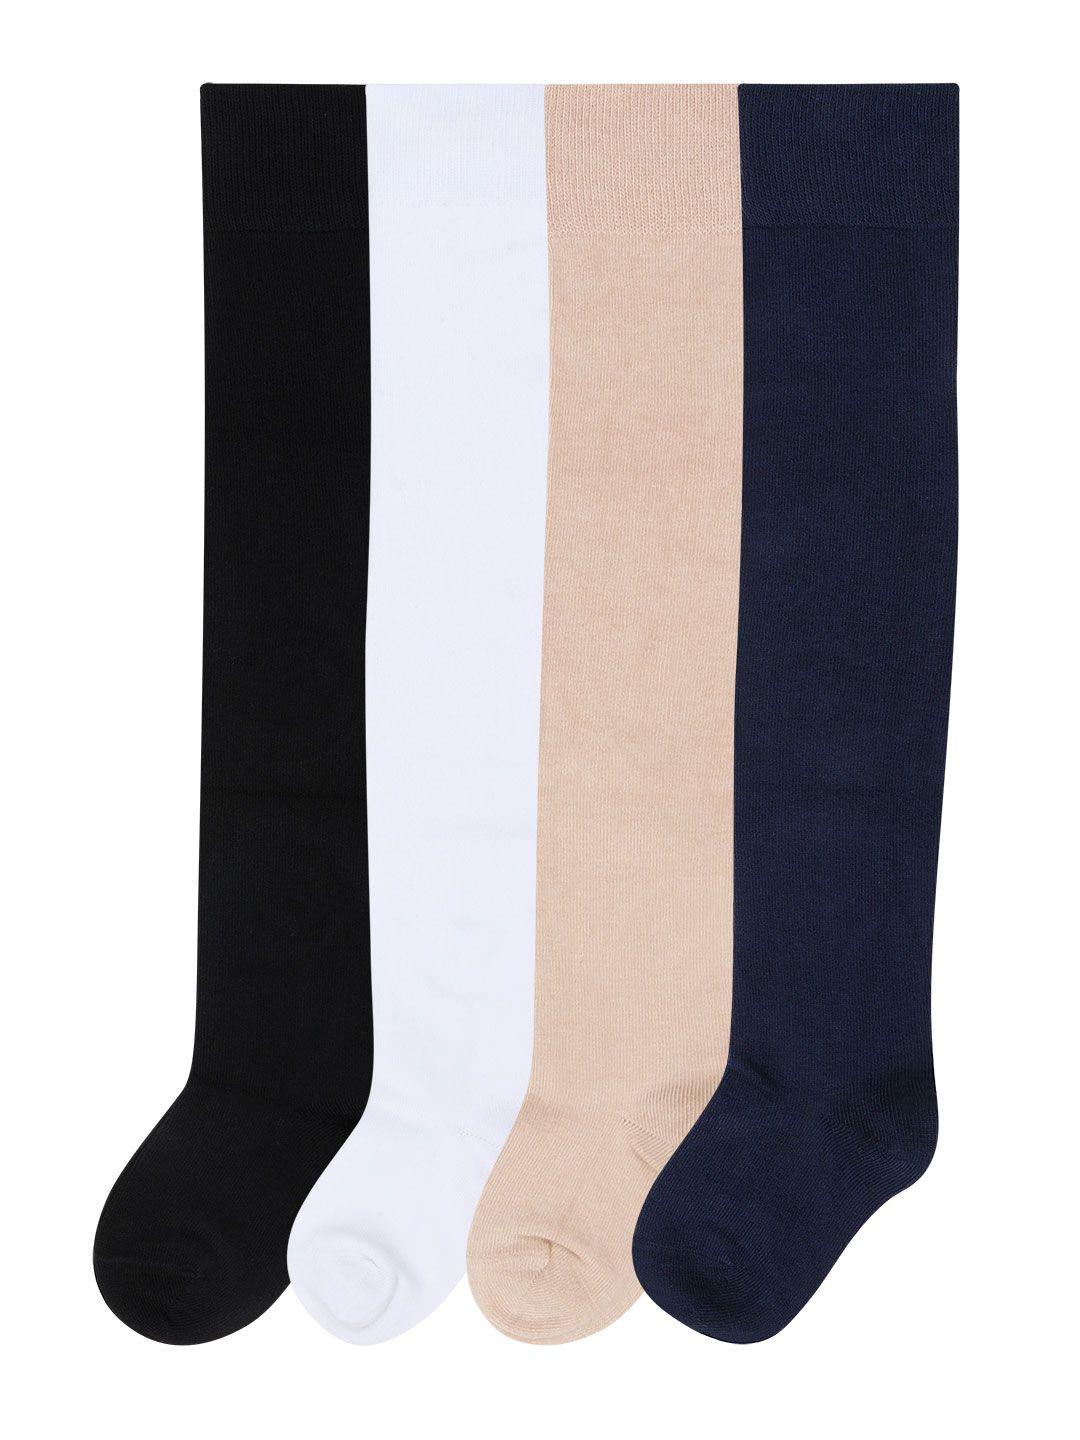 bonjour girls pack of 4 assorted knee high multi-colored stockings 11-13 years